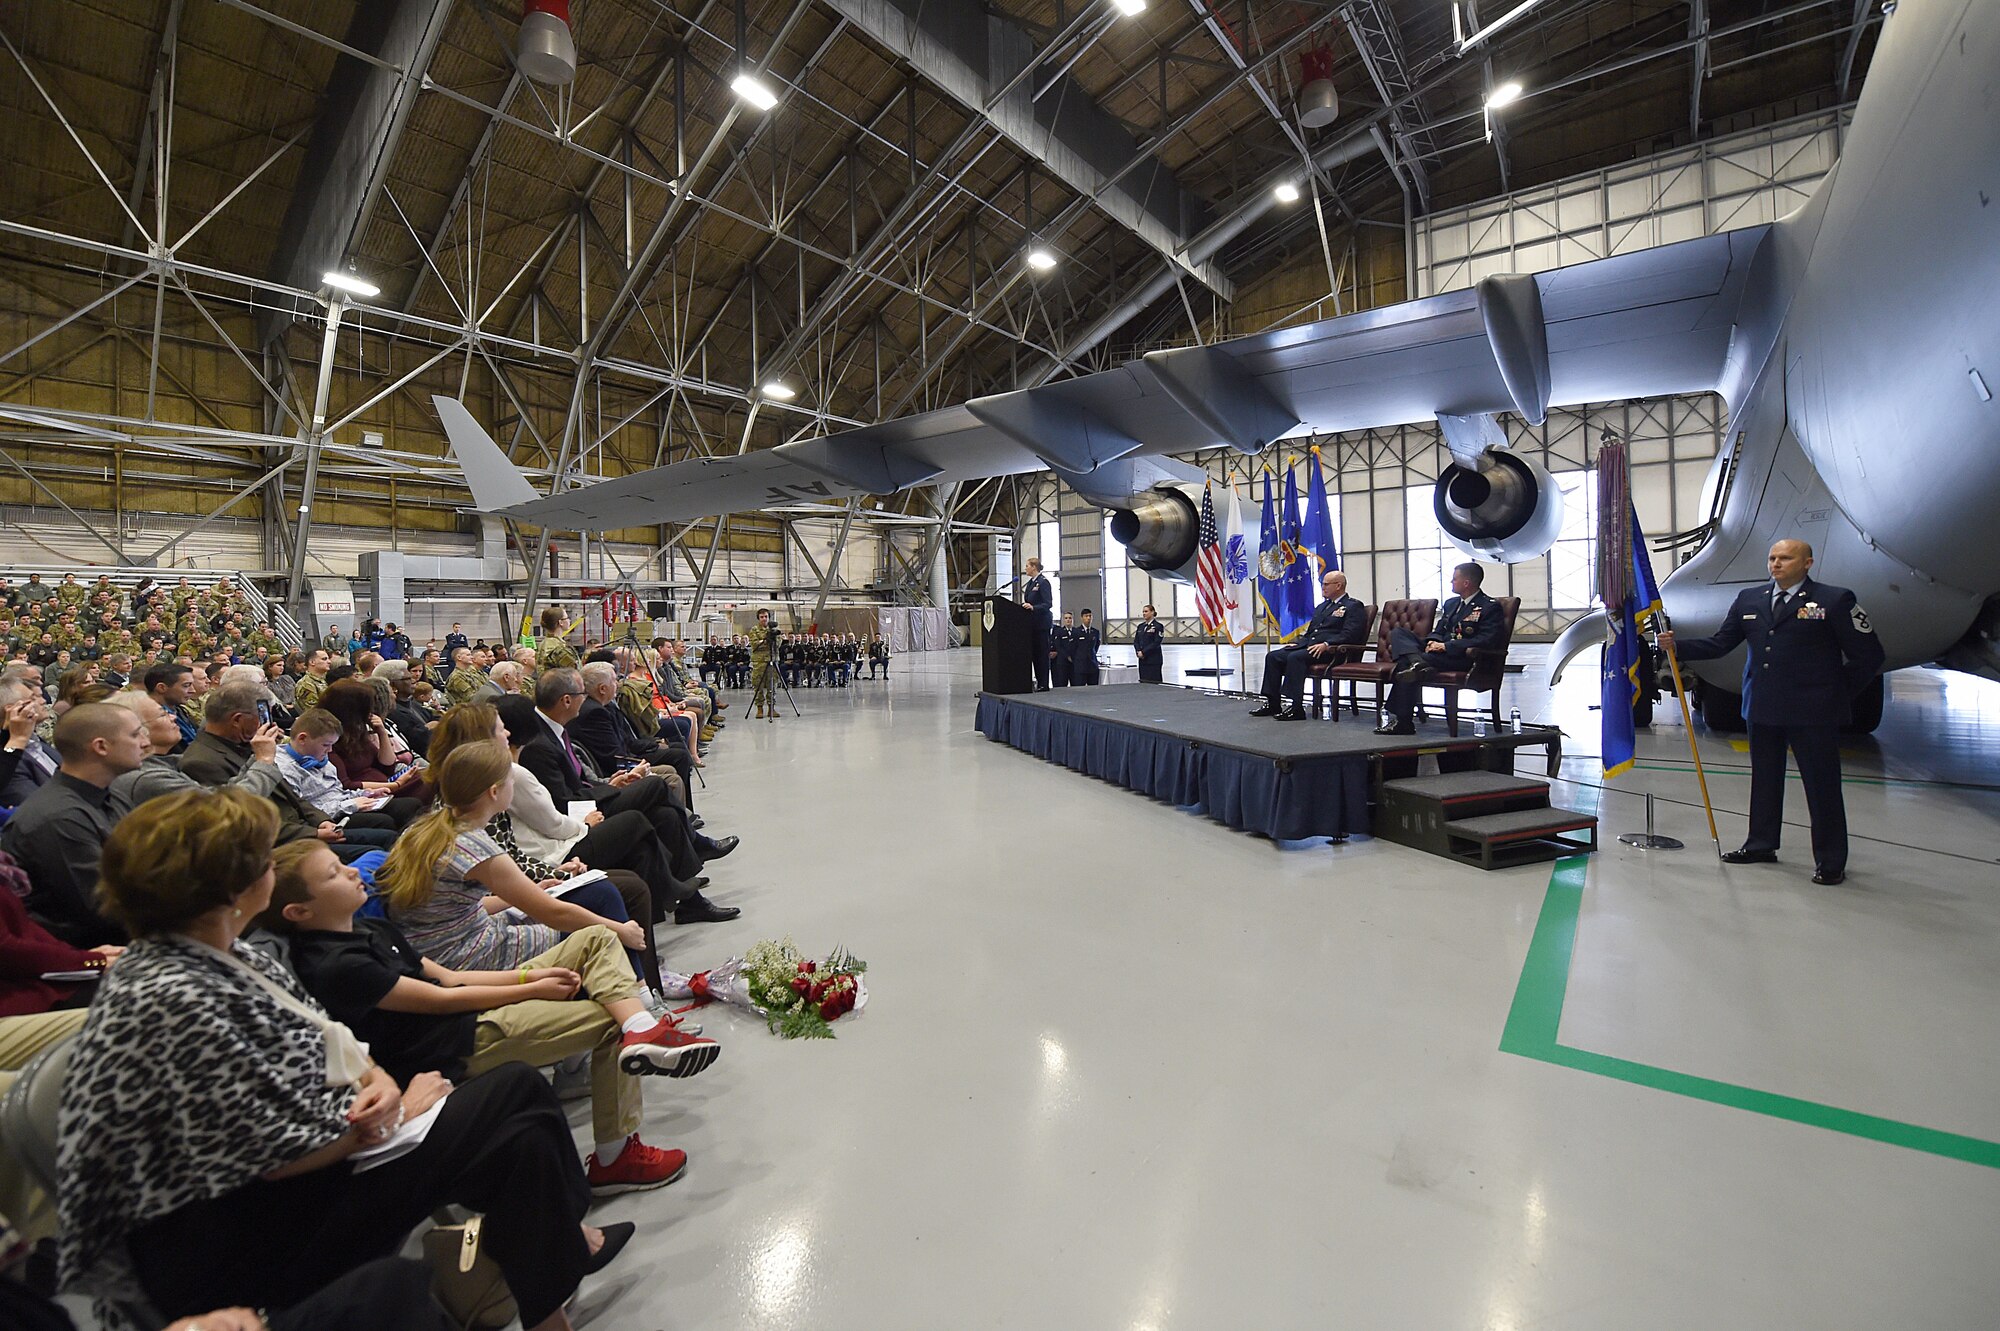 Col. Erin Staine-Pyne, 62nd Airlift Wing commander, center at the podium, address audience members for the first time as the wing commander, at the 62nd Airlift Wing change of command ceremony on Joint Base Lewis-McChord, Wash., Jan. 10, 2020.